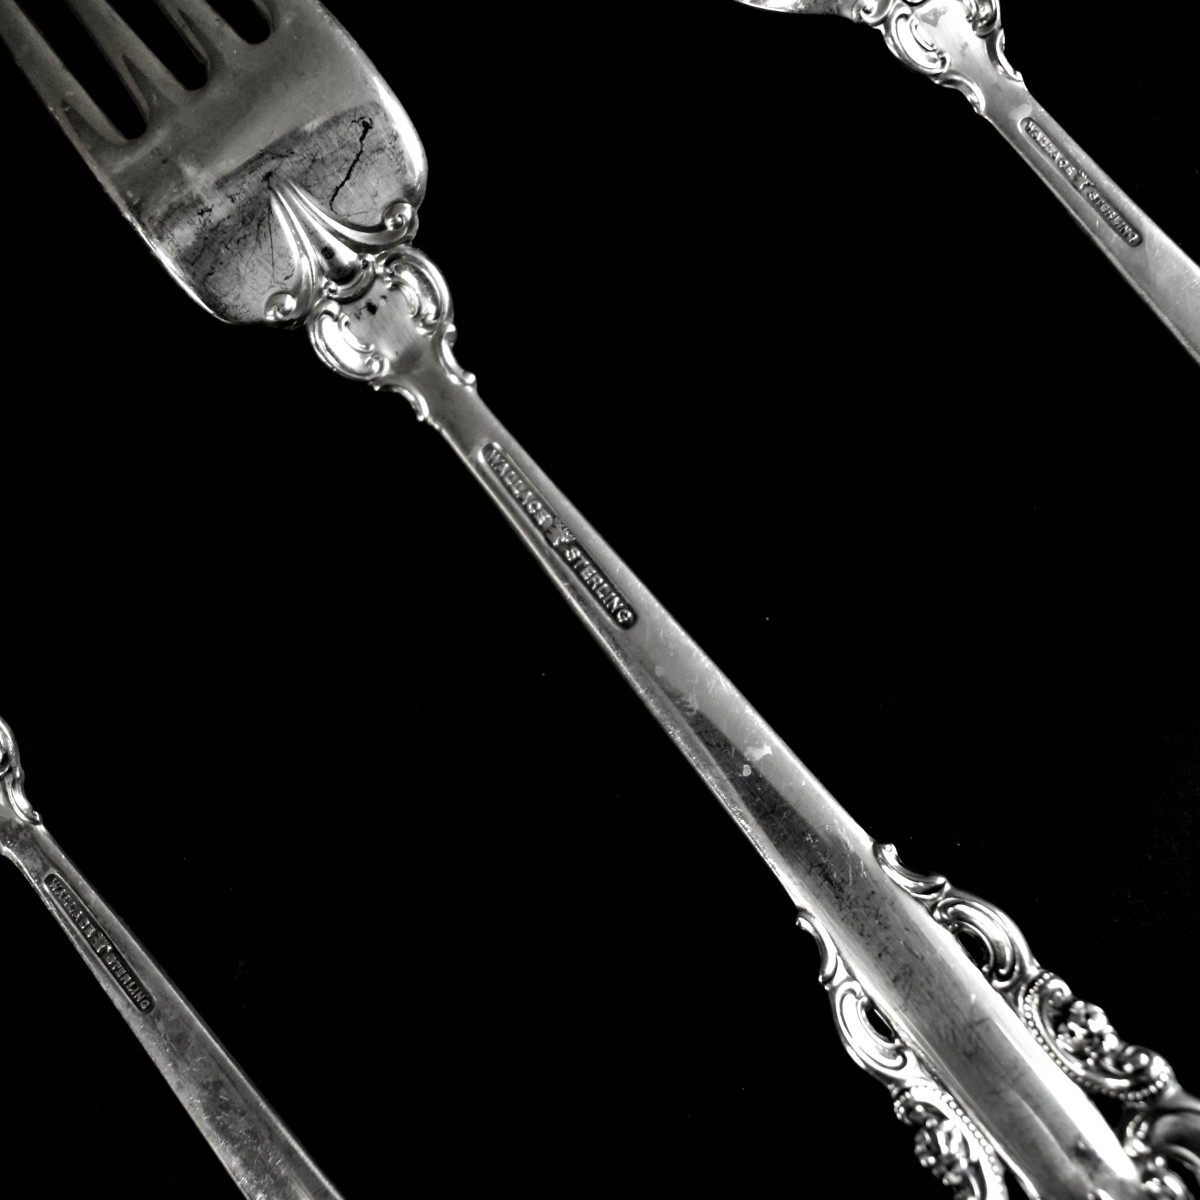 Wallace "Grand Baroque" Sterling Flatware Set